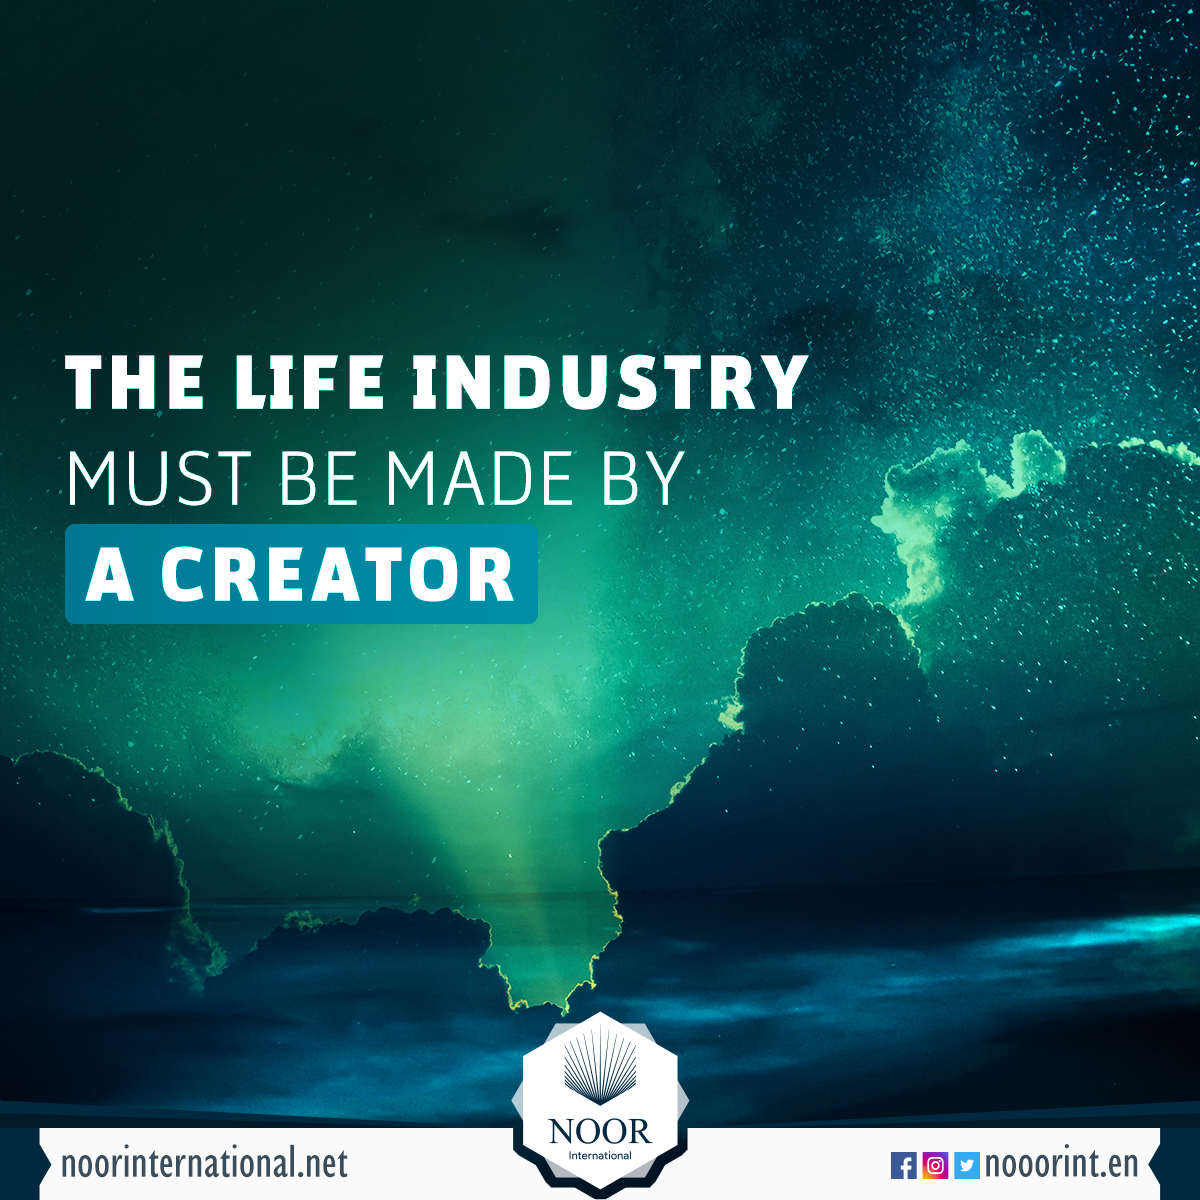 The life industry must be made by a Creator